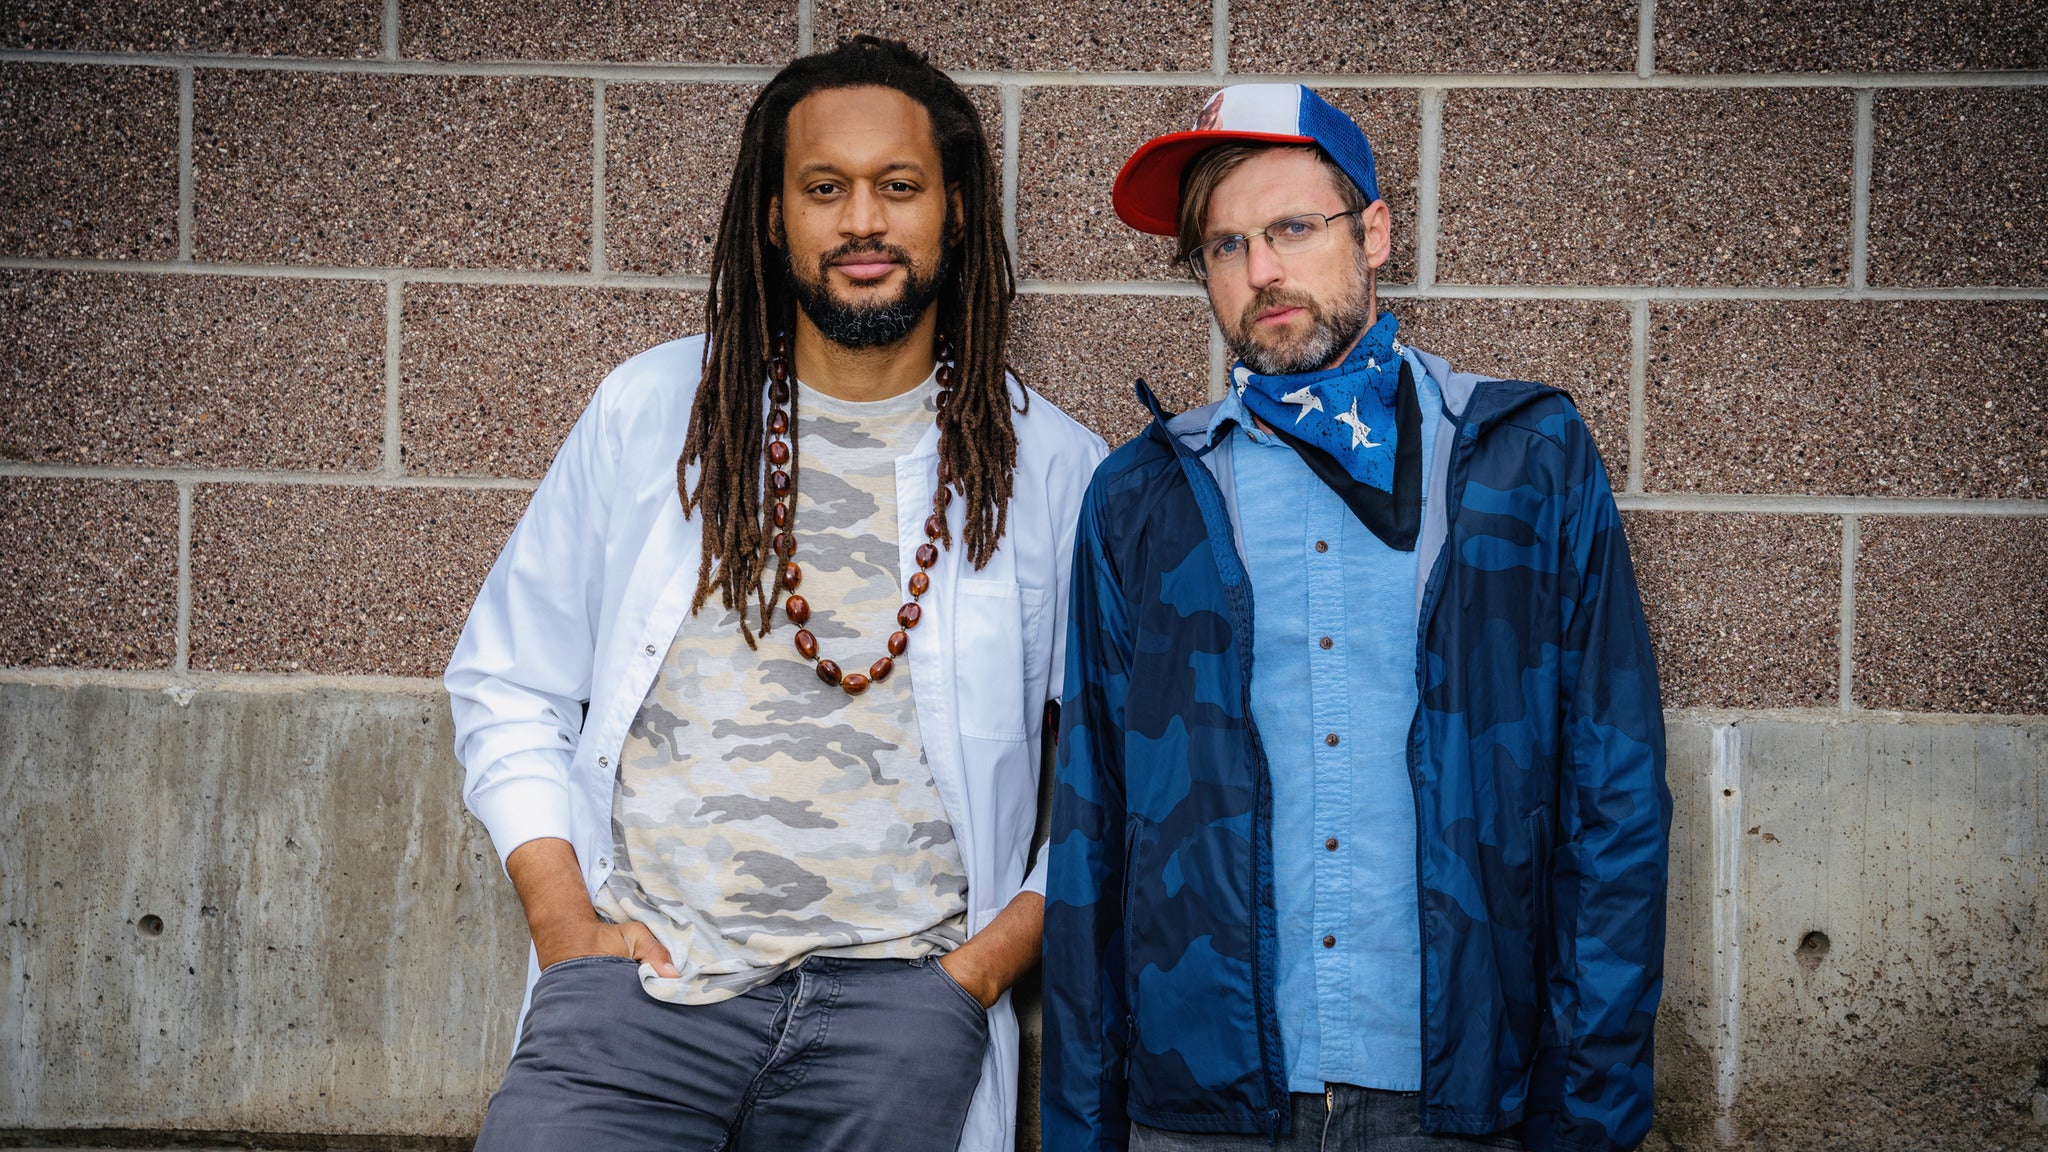 Flobots in St Louis promo photo for VIP Package presale offer code